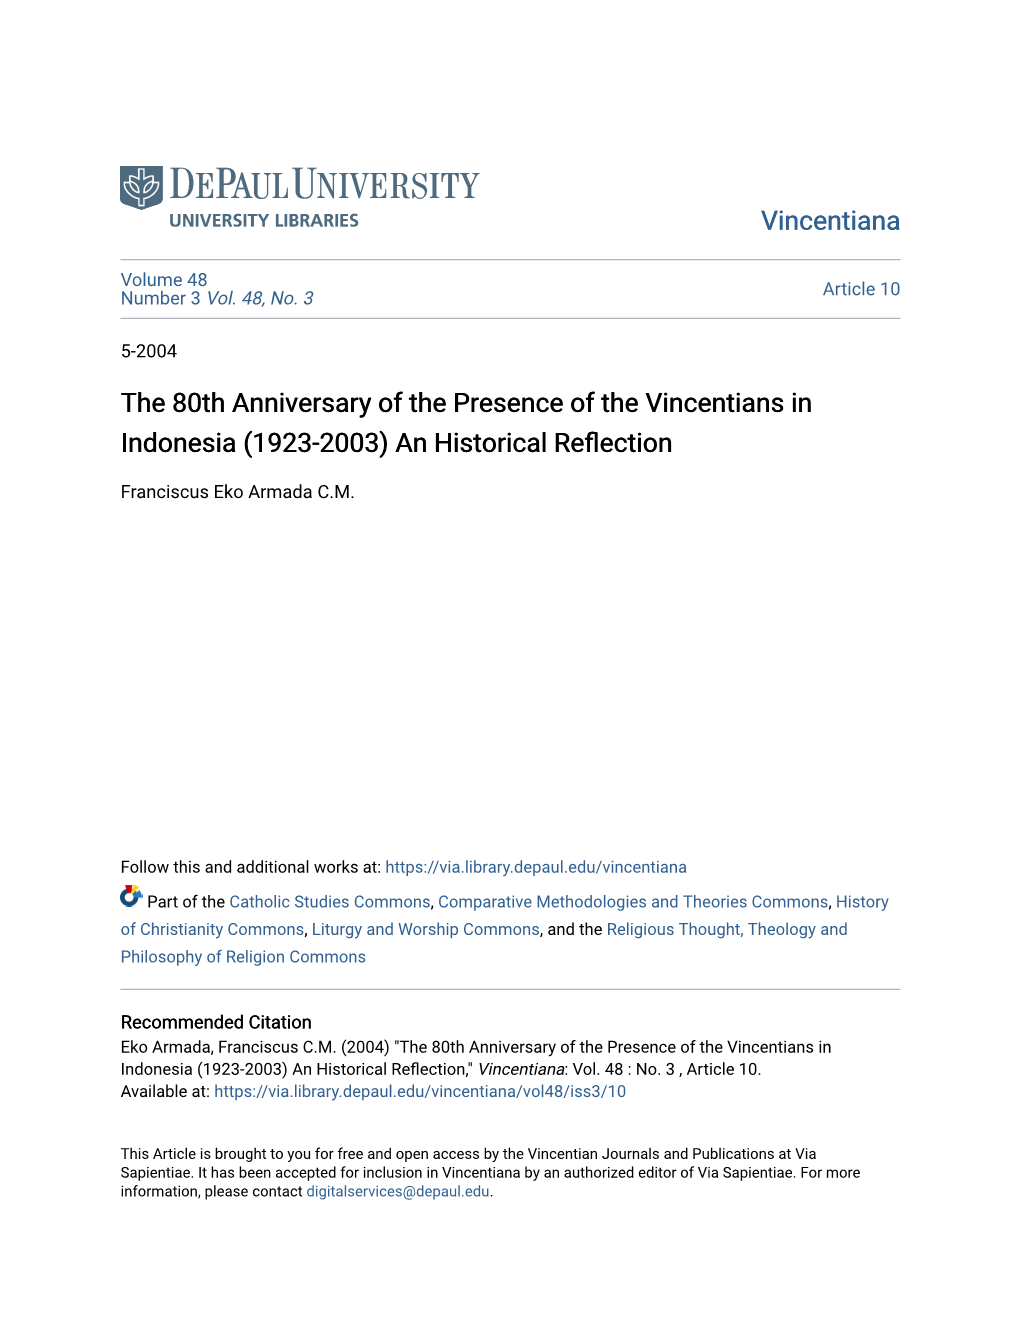 The 80Th Anniversary of the Presence of the Vincentians in Indonesia (1923-2003) an Historical Reflection